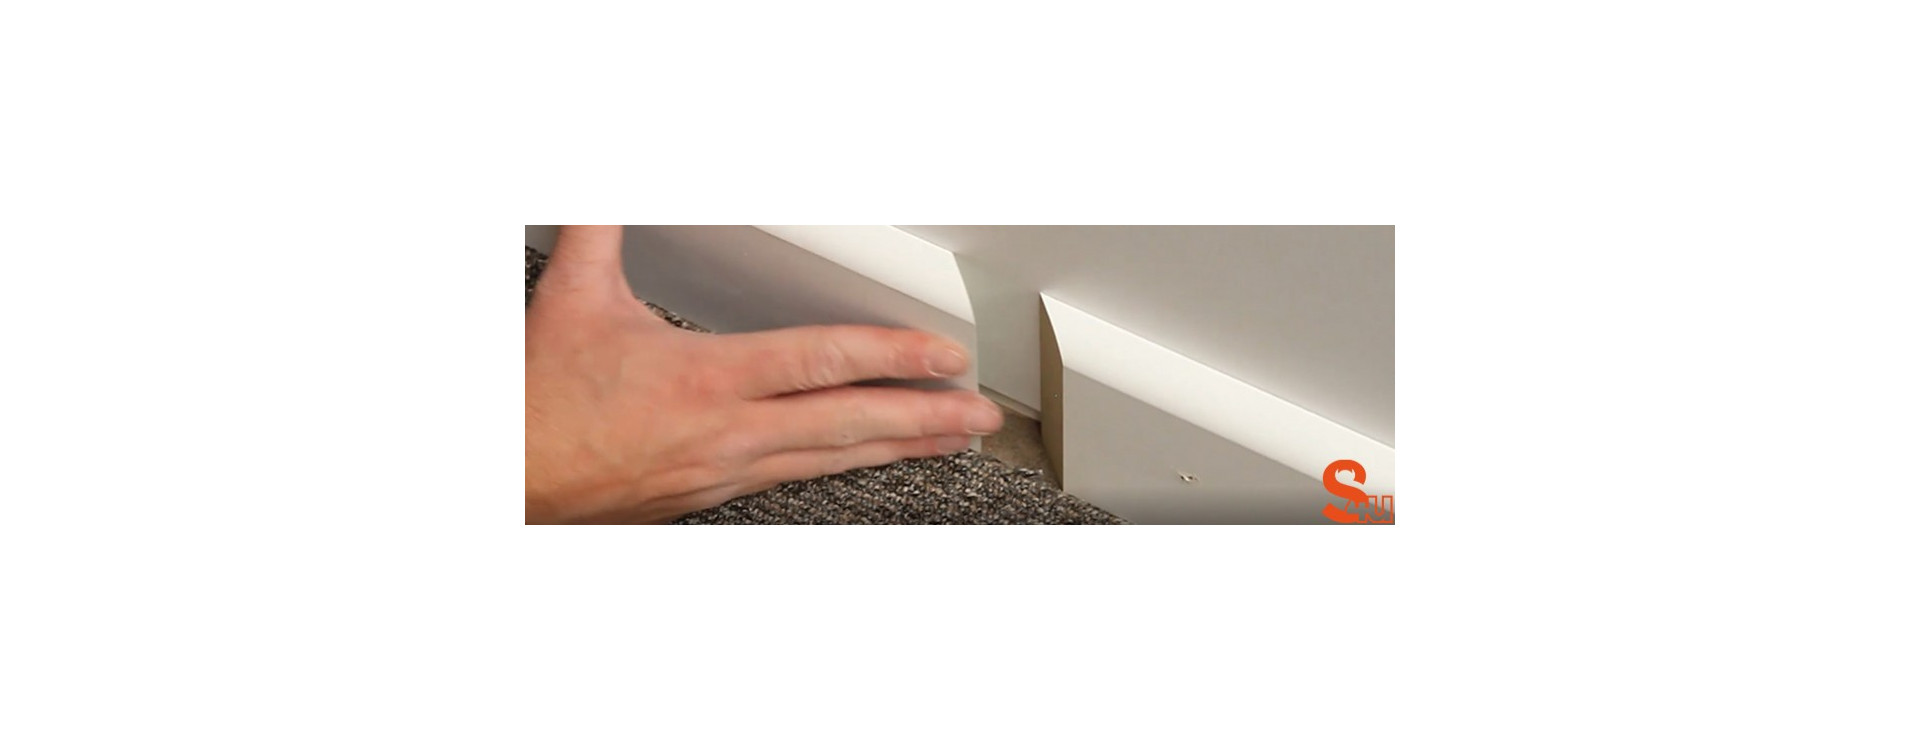 How to join two pieces of skirting board together on a flat wall